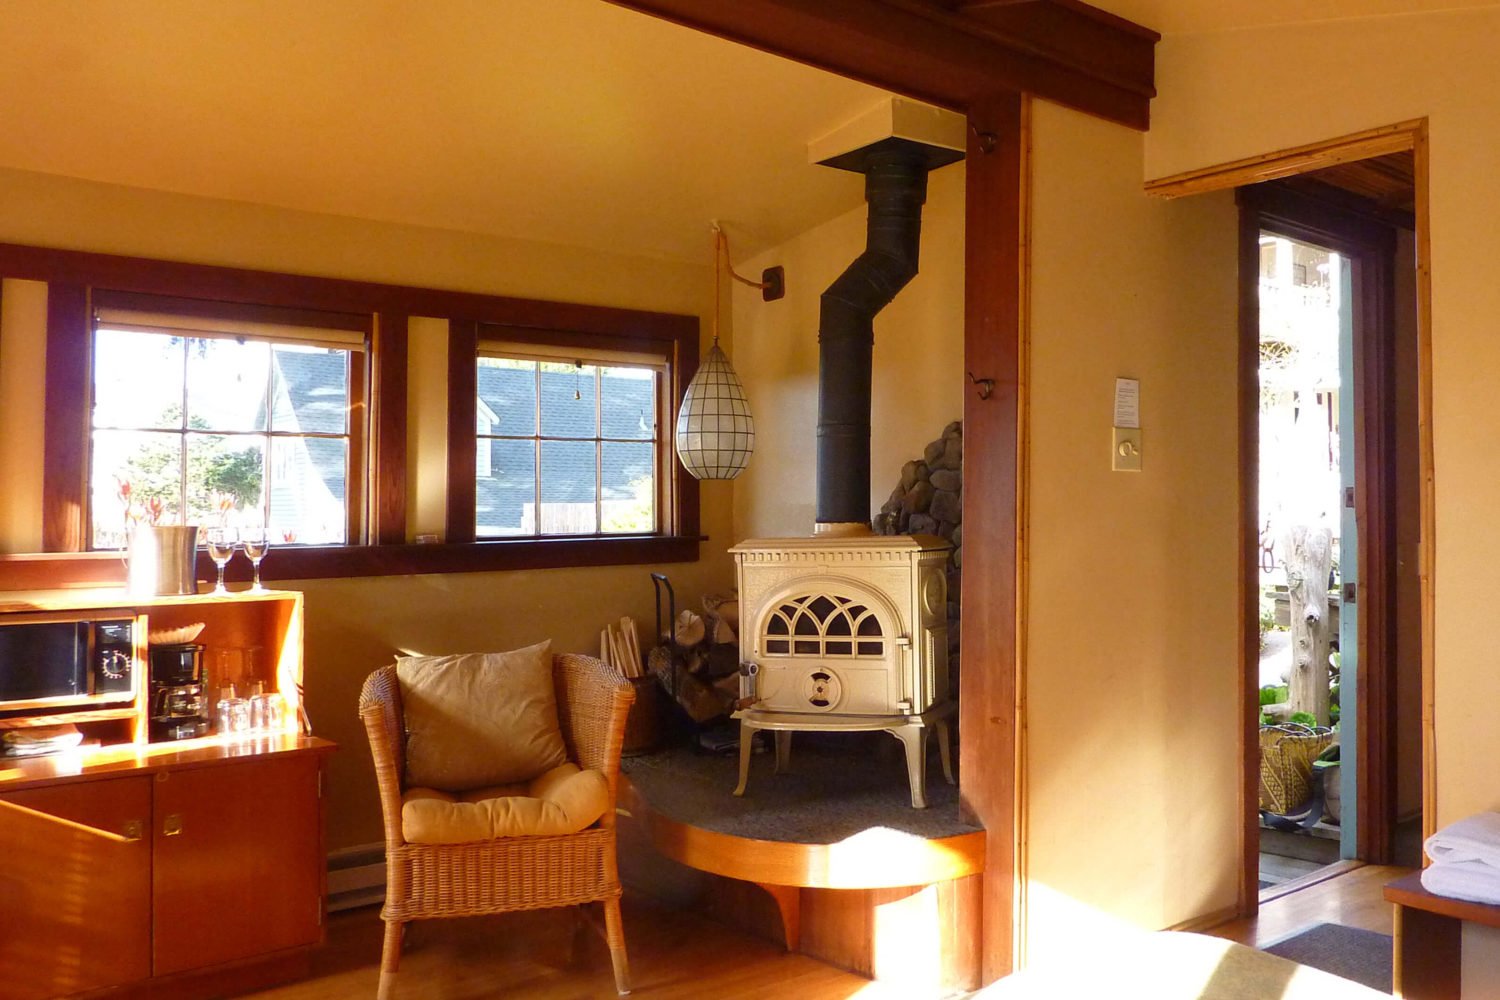 Cove room - view of stove, chair, bar, square windows and door